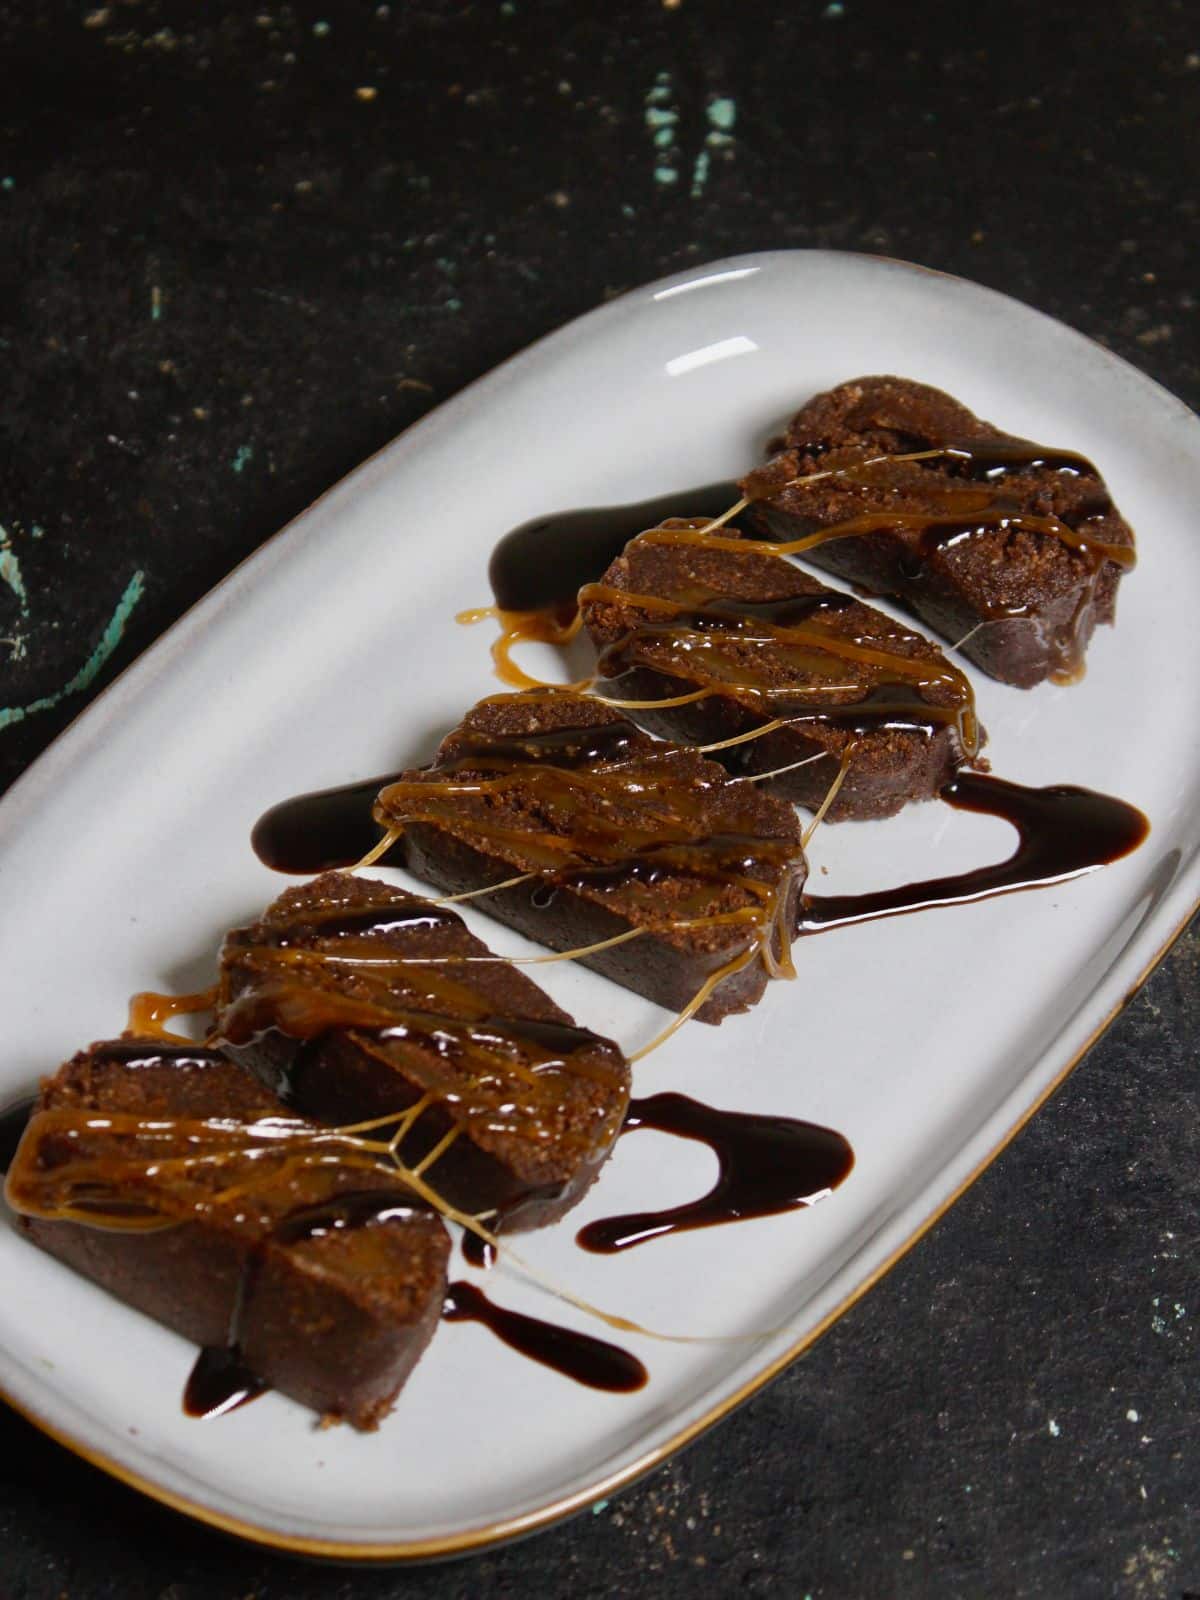 Drizzle chocolate sauce and caramel sauce and enjoy 